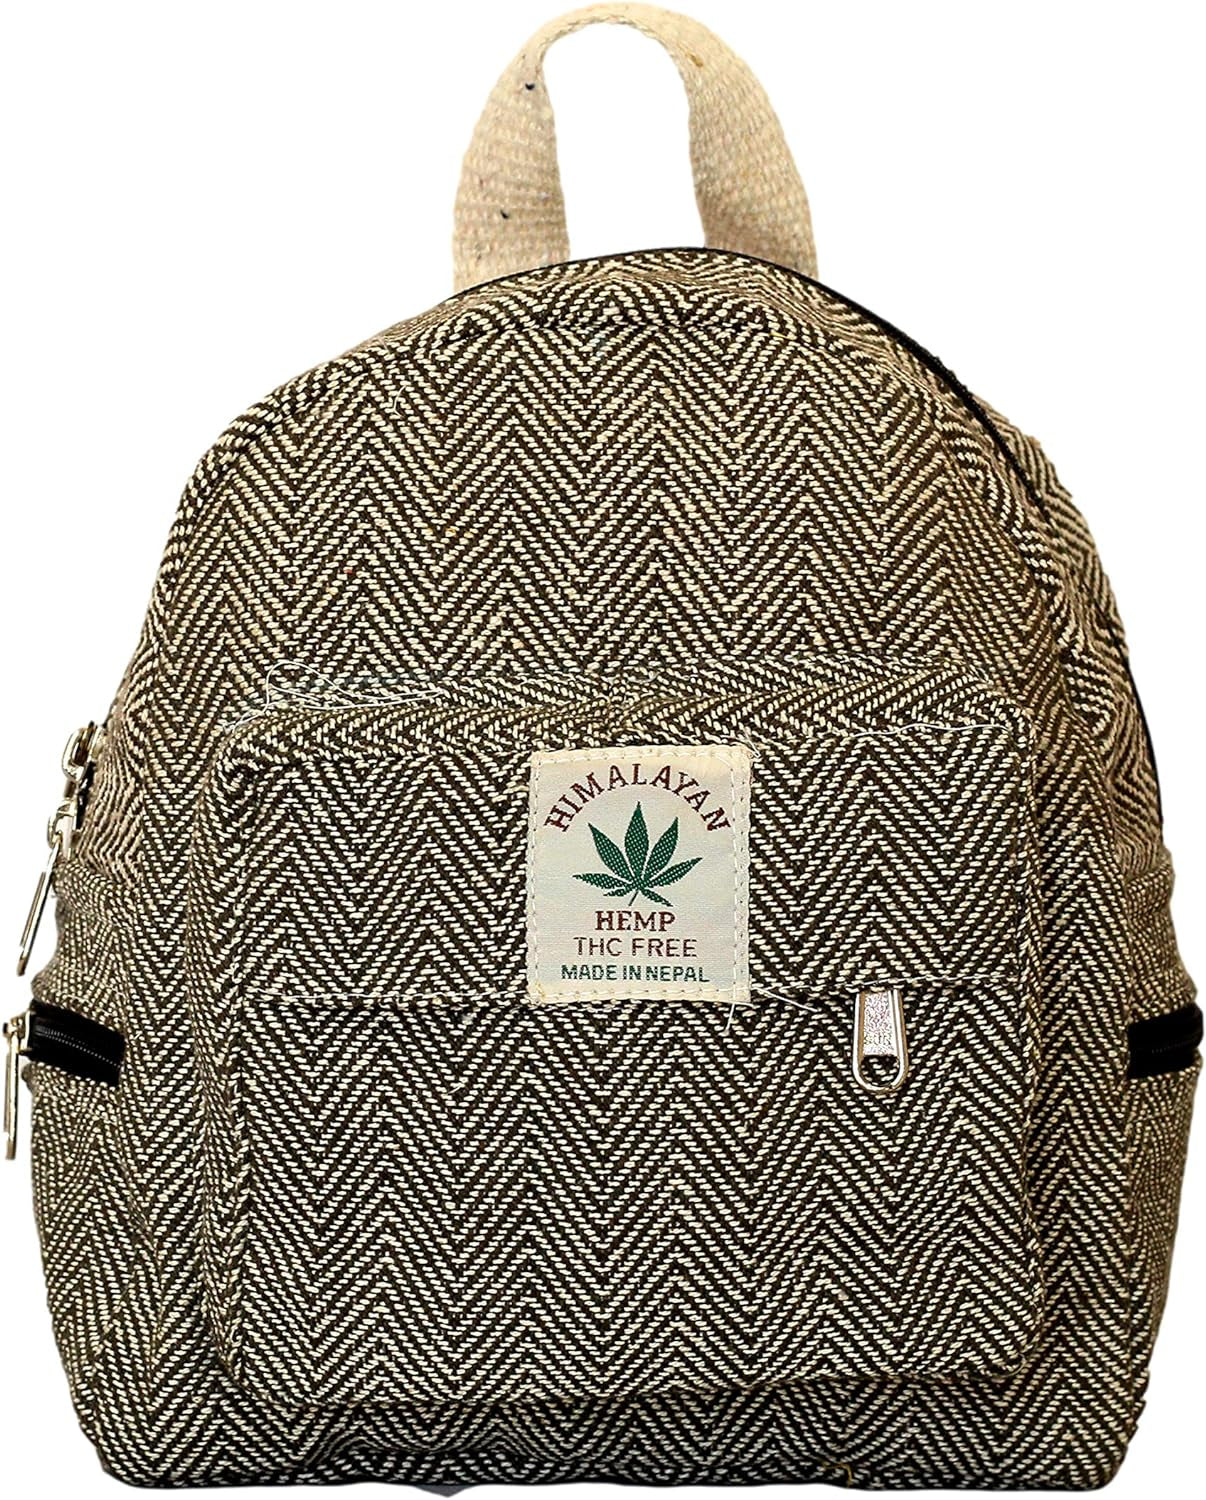 Handmade Hemp Mini Backpack for Women Girls Purse Cute Eco Friendly Light Weight Washable Small Bag for Everyday Lives (DARKGREEN)